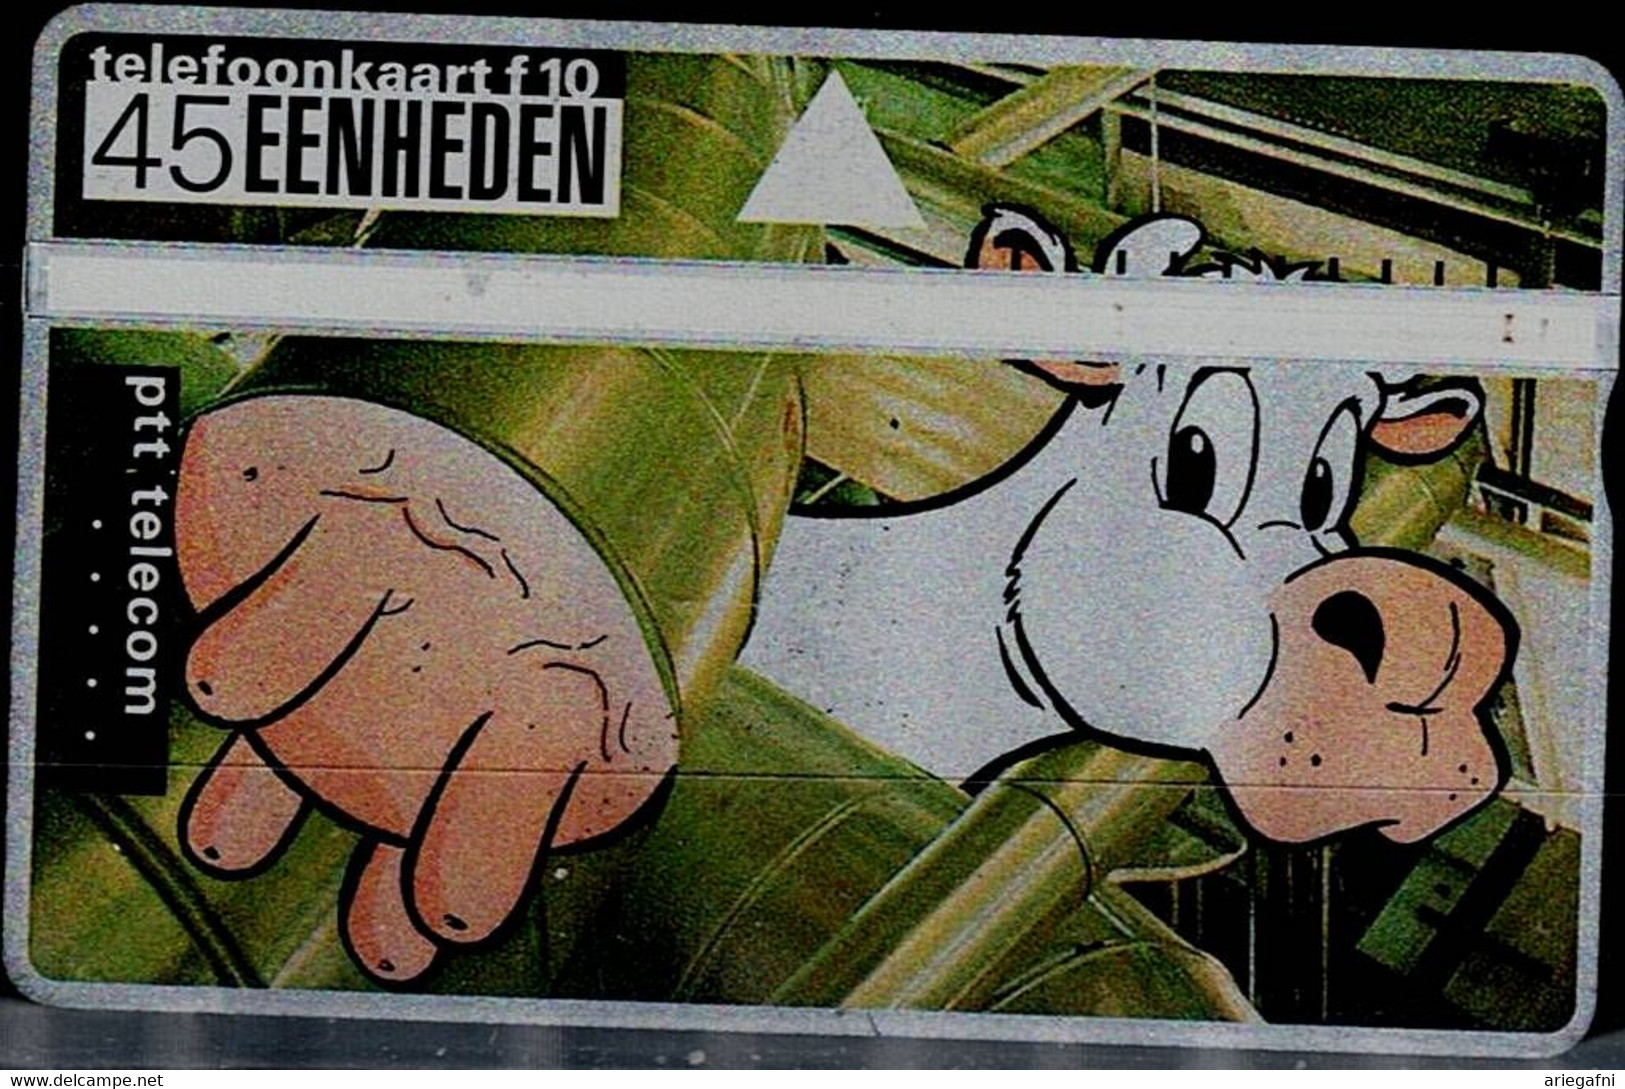 NETHERLANDS 1995 PHONECARD LOTS OF COWS, LOTS OF WORK USED VF!! - Publiques